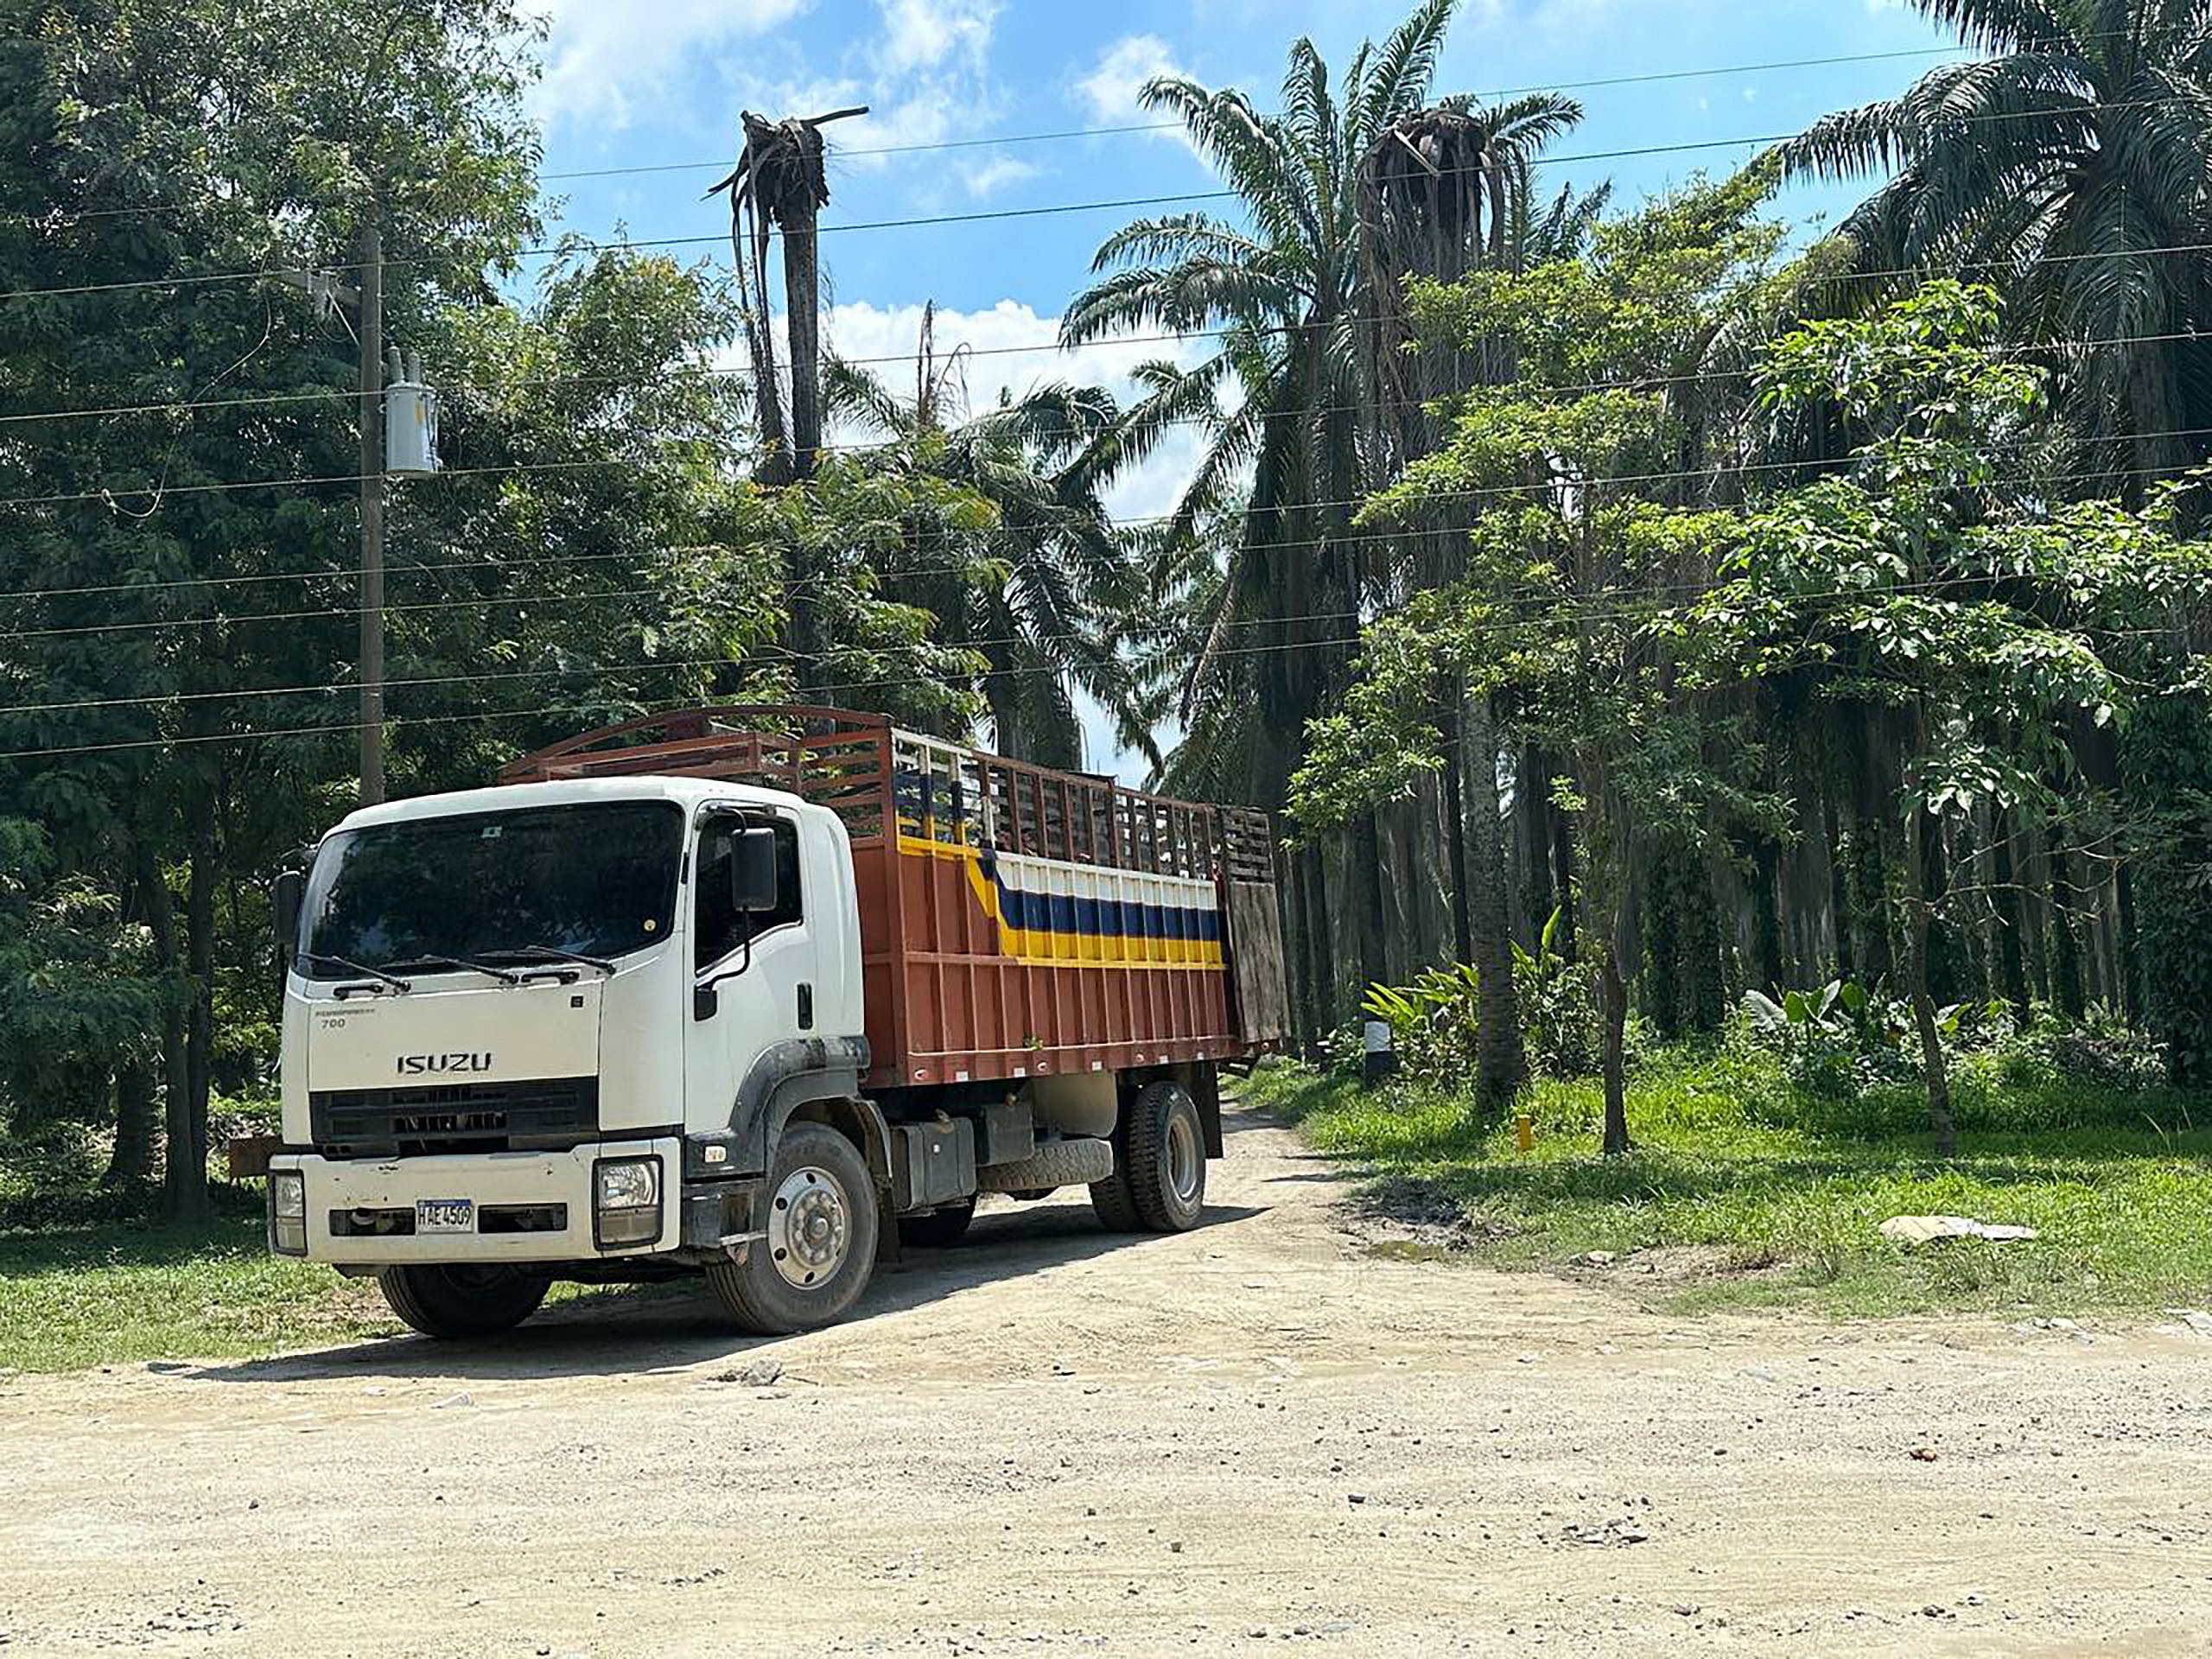 A truck on a road surrounded by oil palm trees